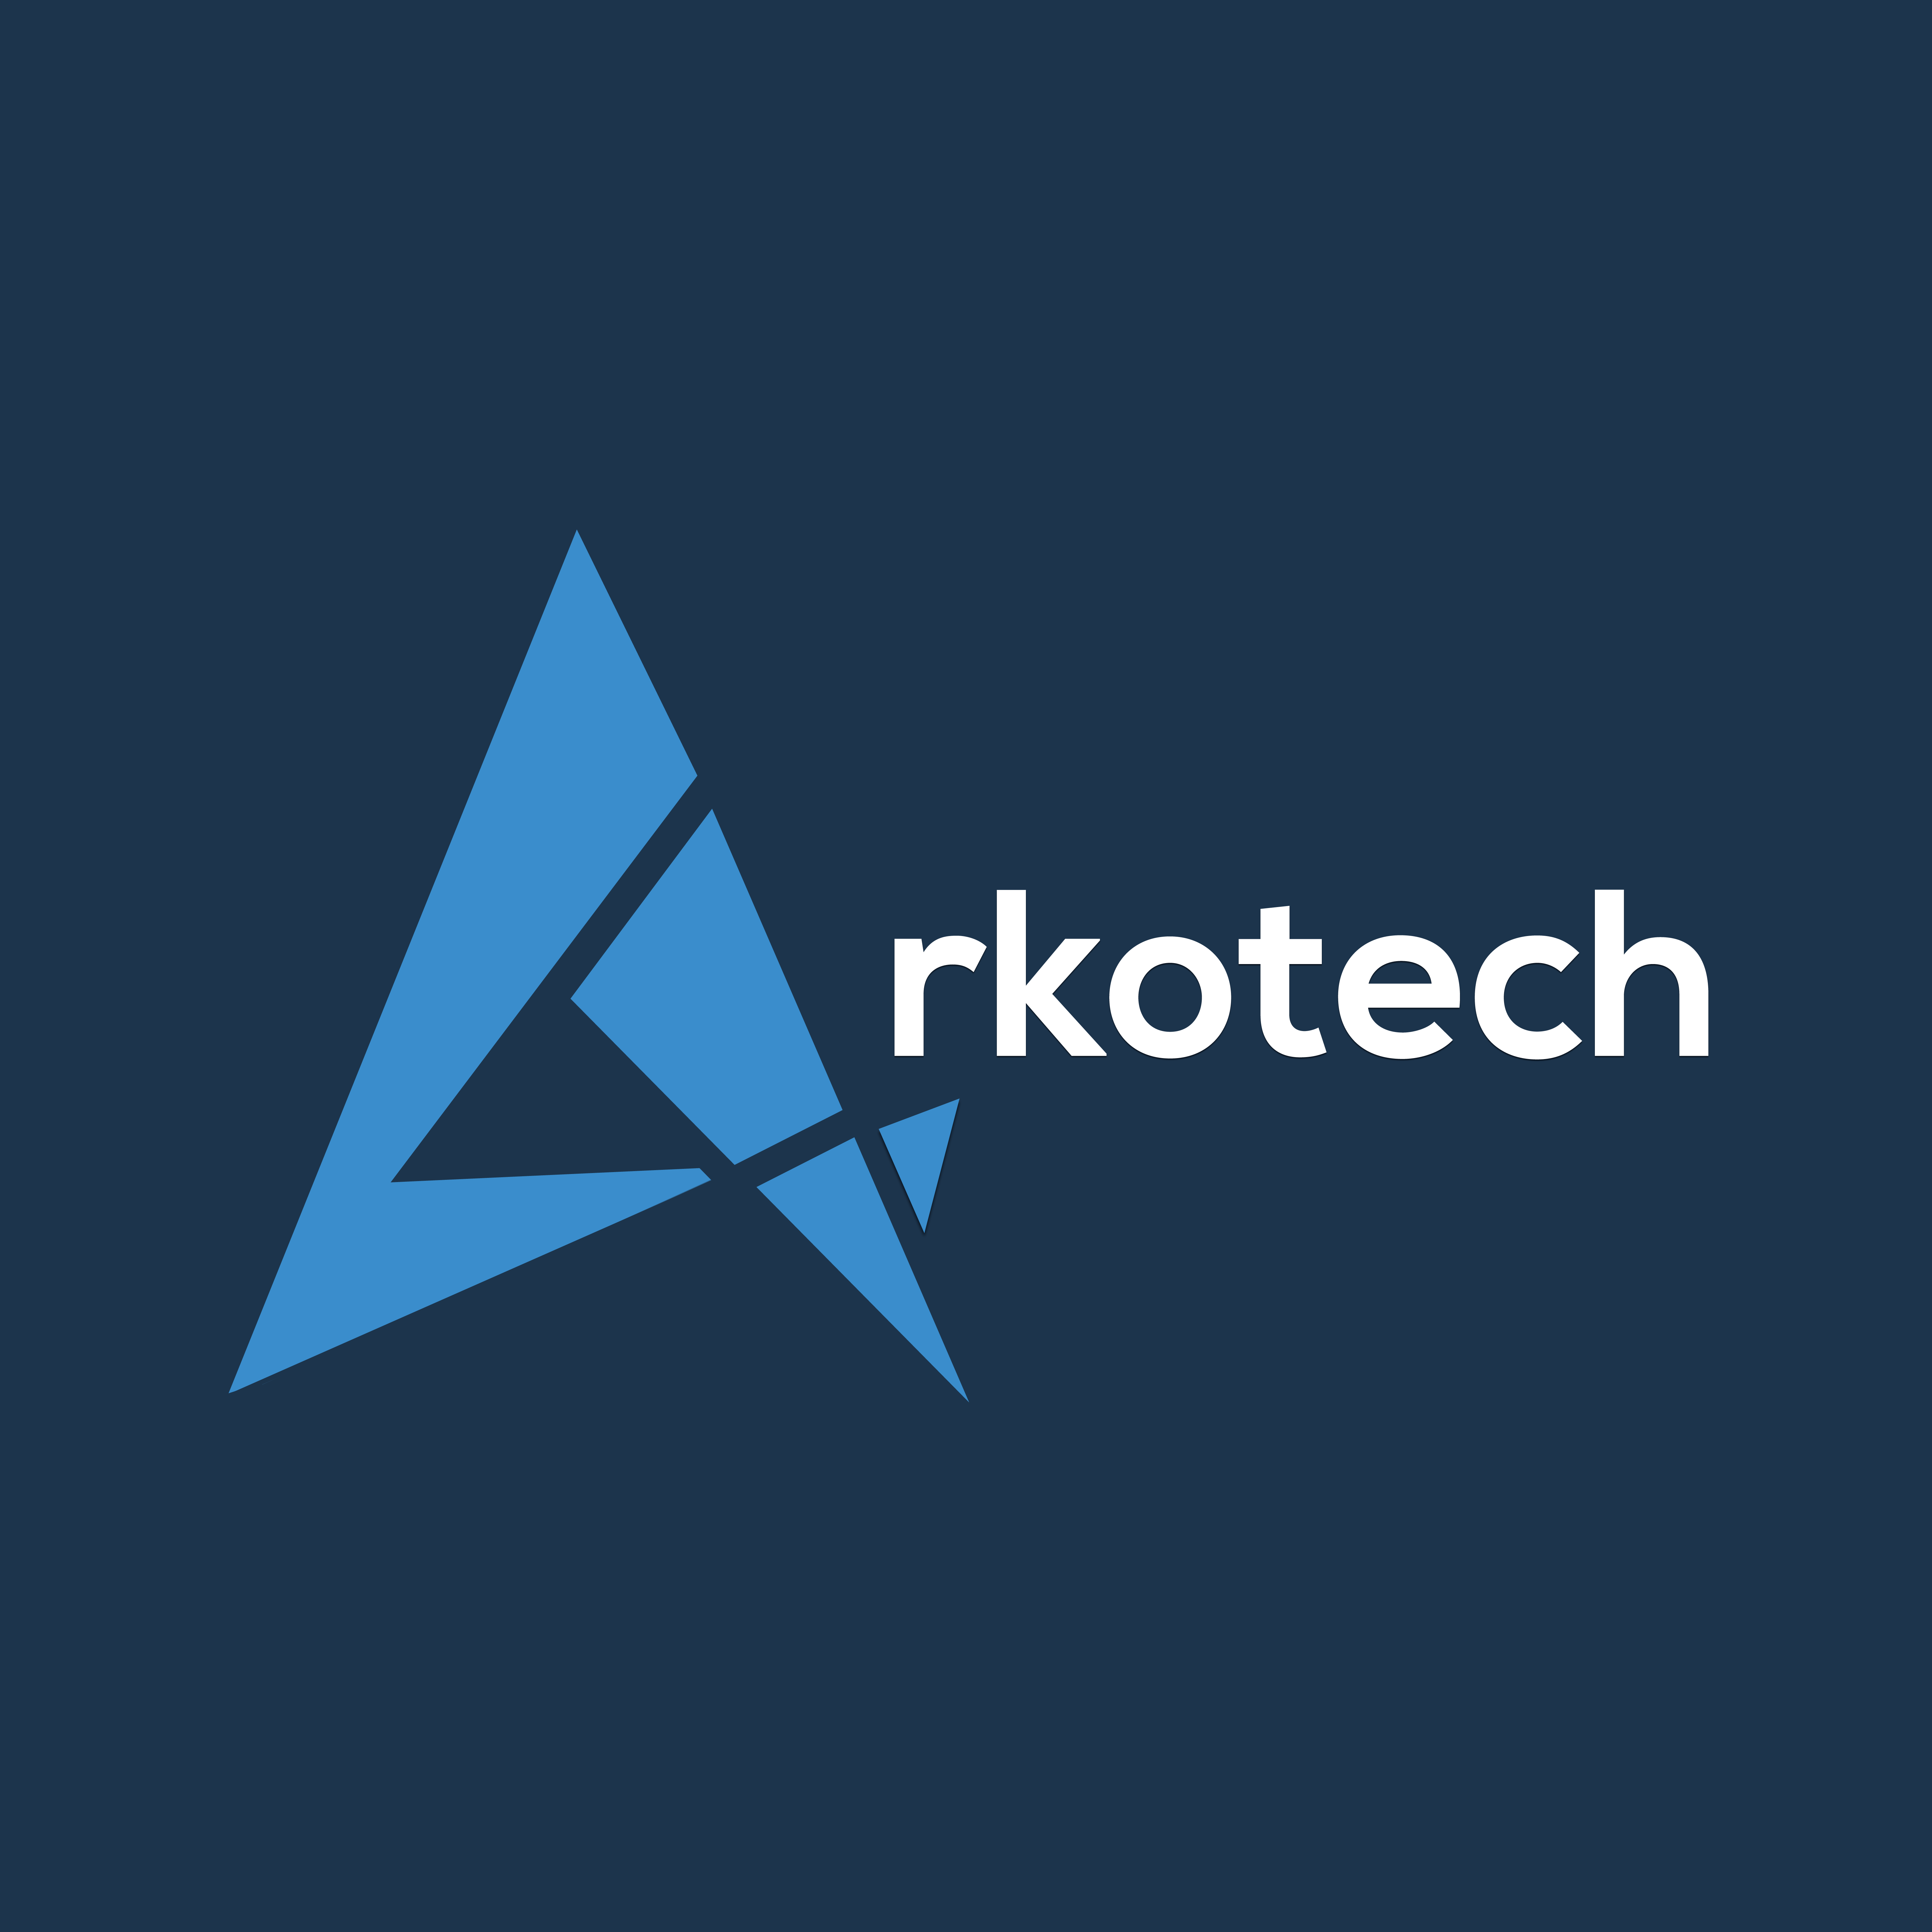 Arkotech Corporation profile on Qualified.One